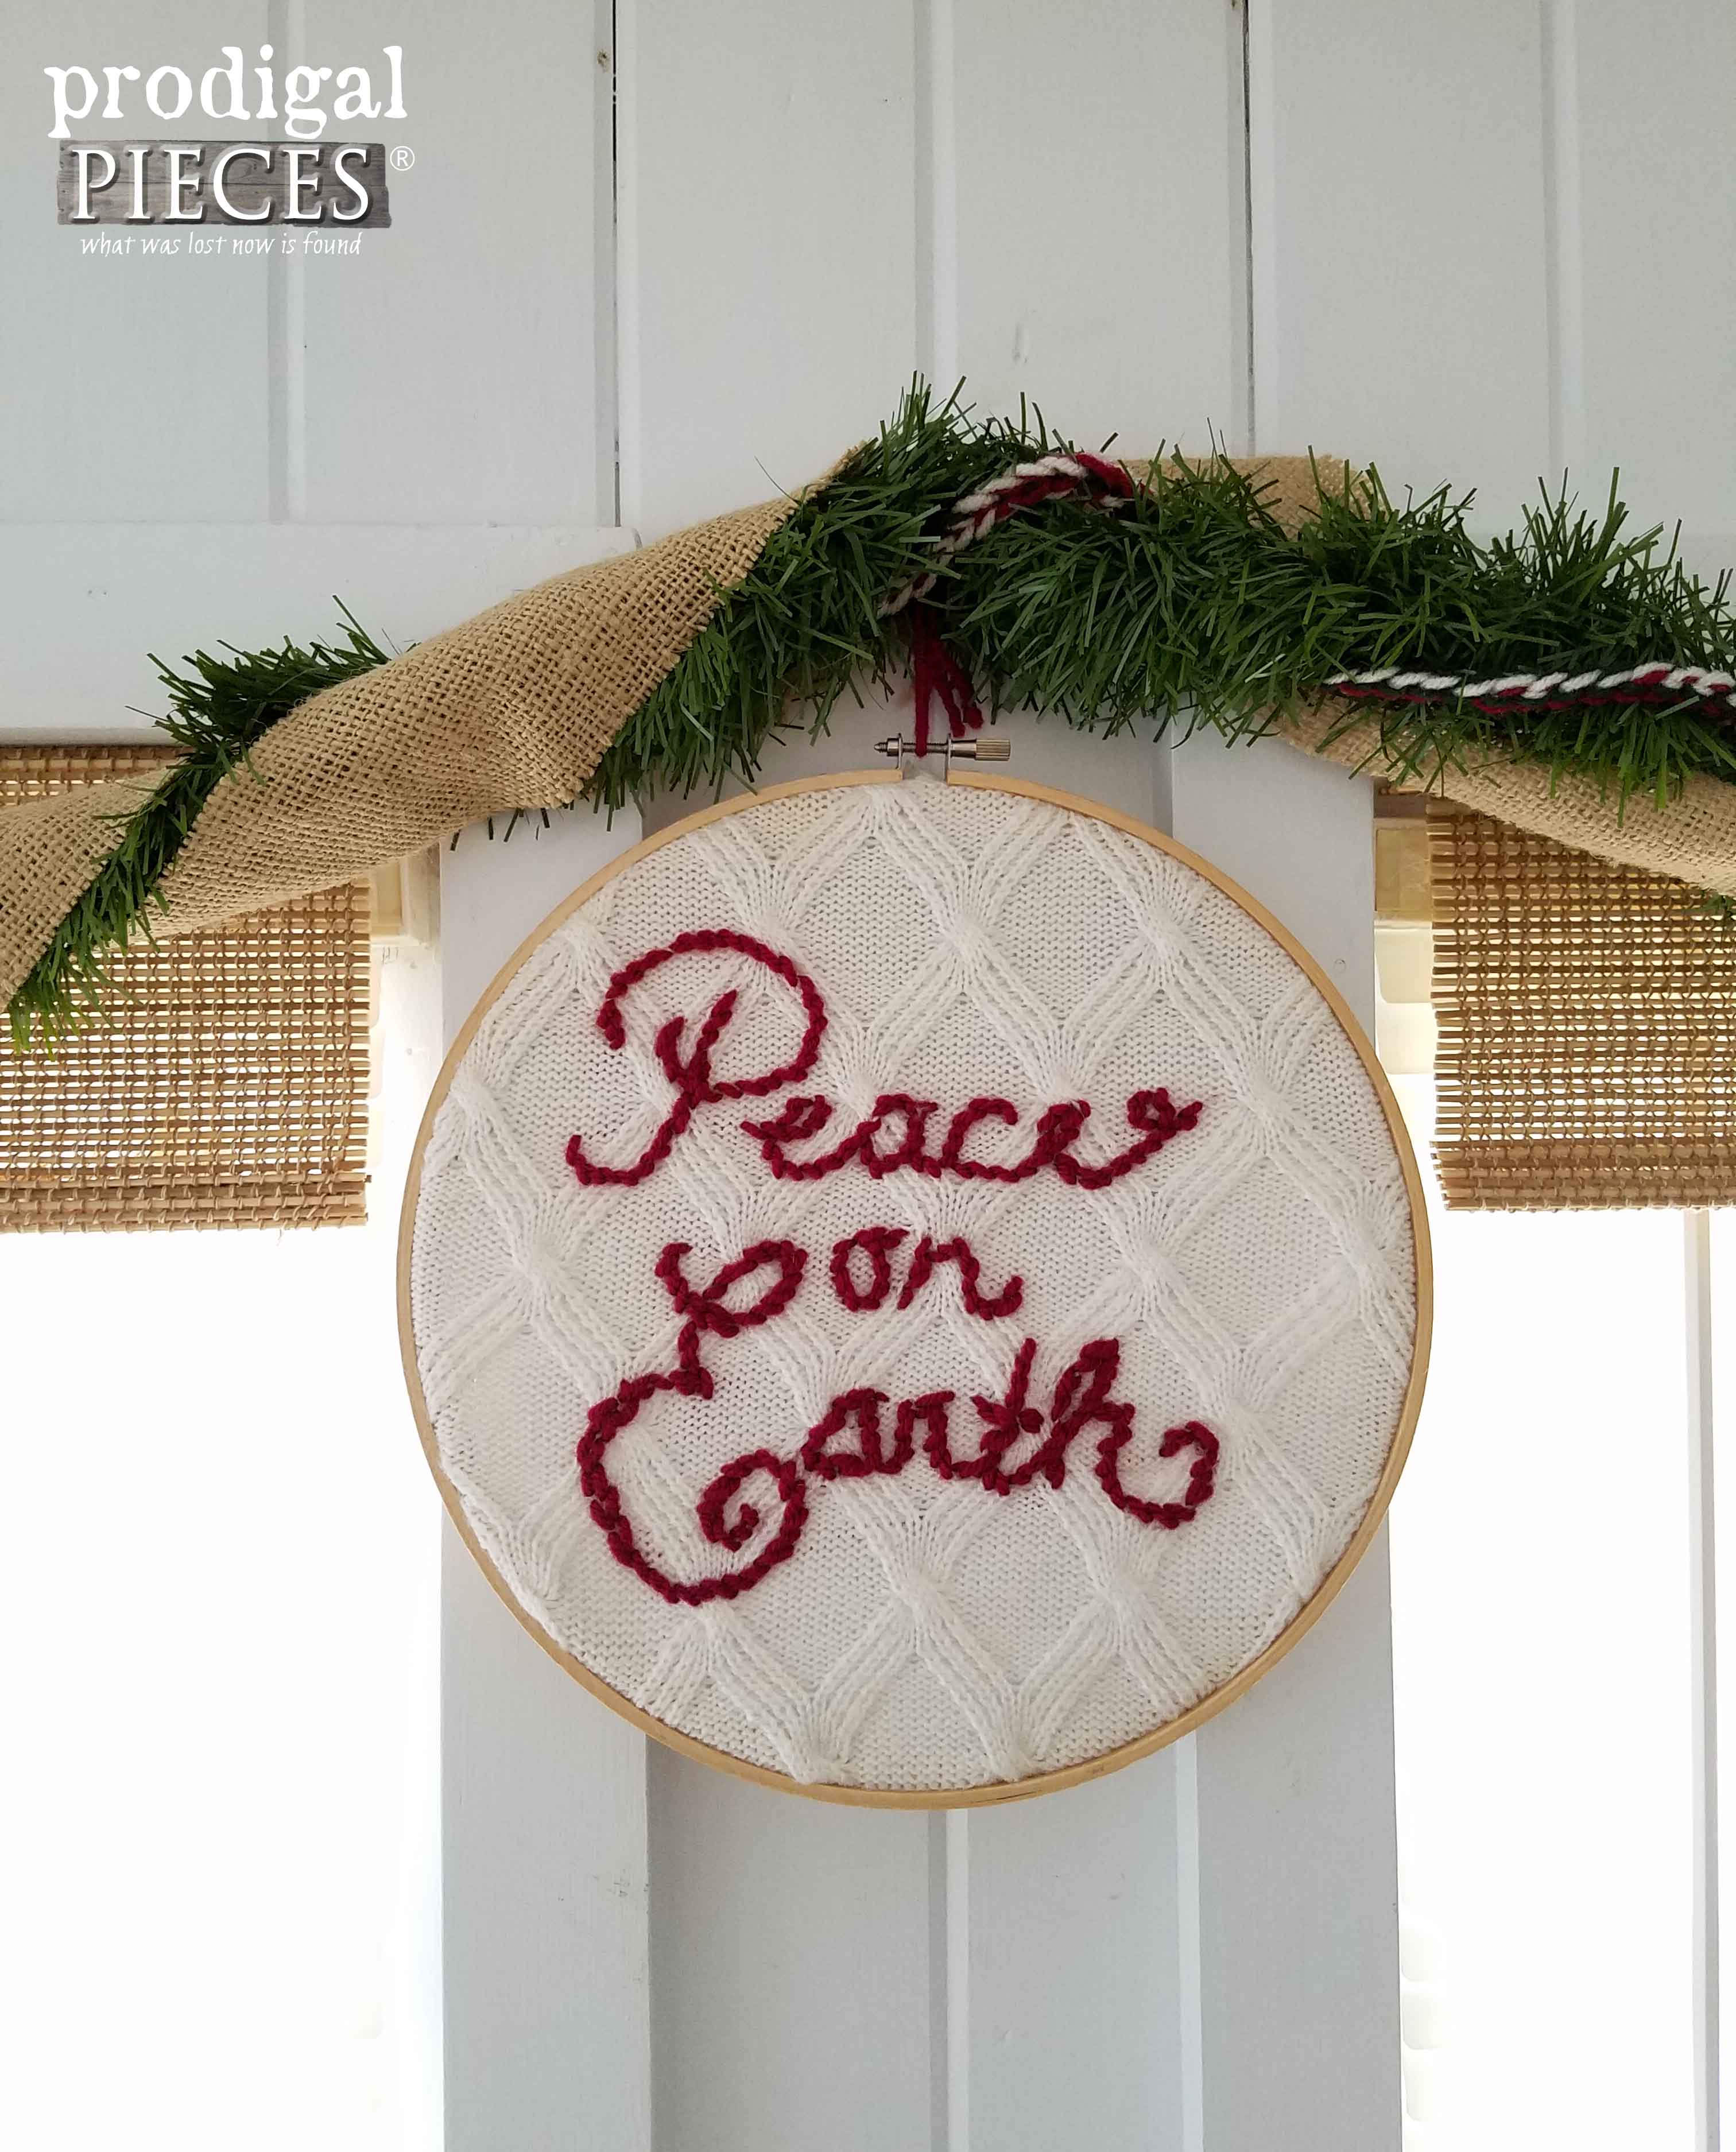 Peace on Earth Embroidered on a Thrifted Sweater in an Embroidery Hoop by Prodigal Pieces | www.prodigalpieces.com